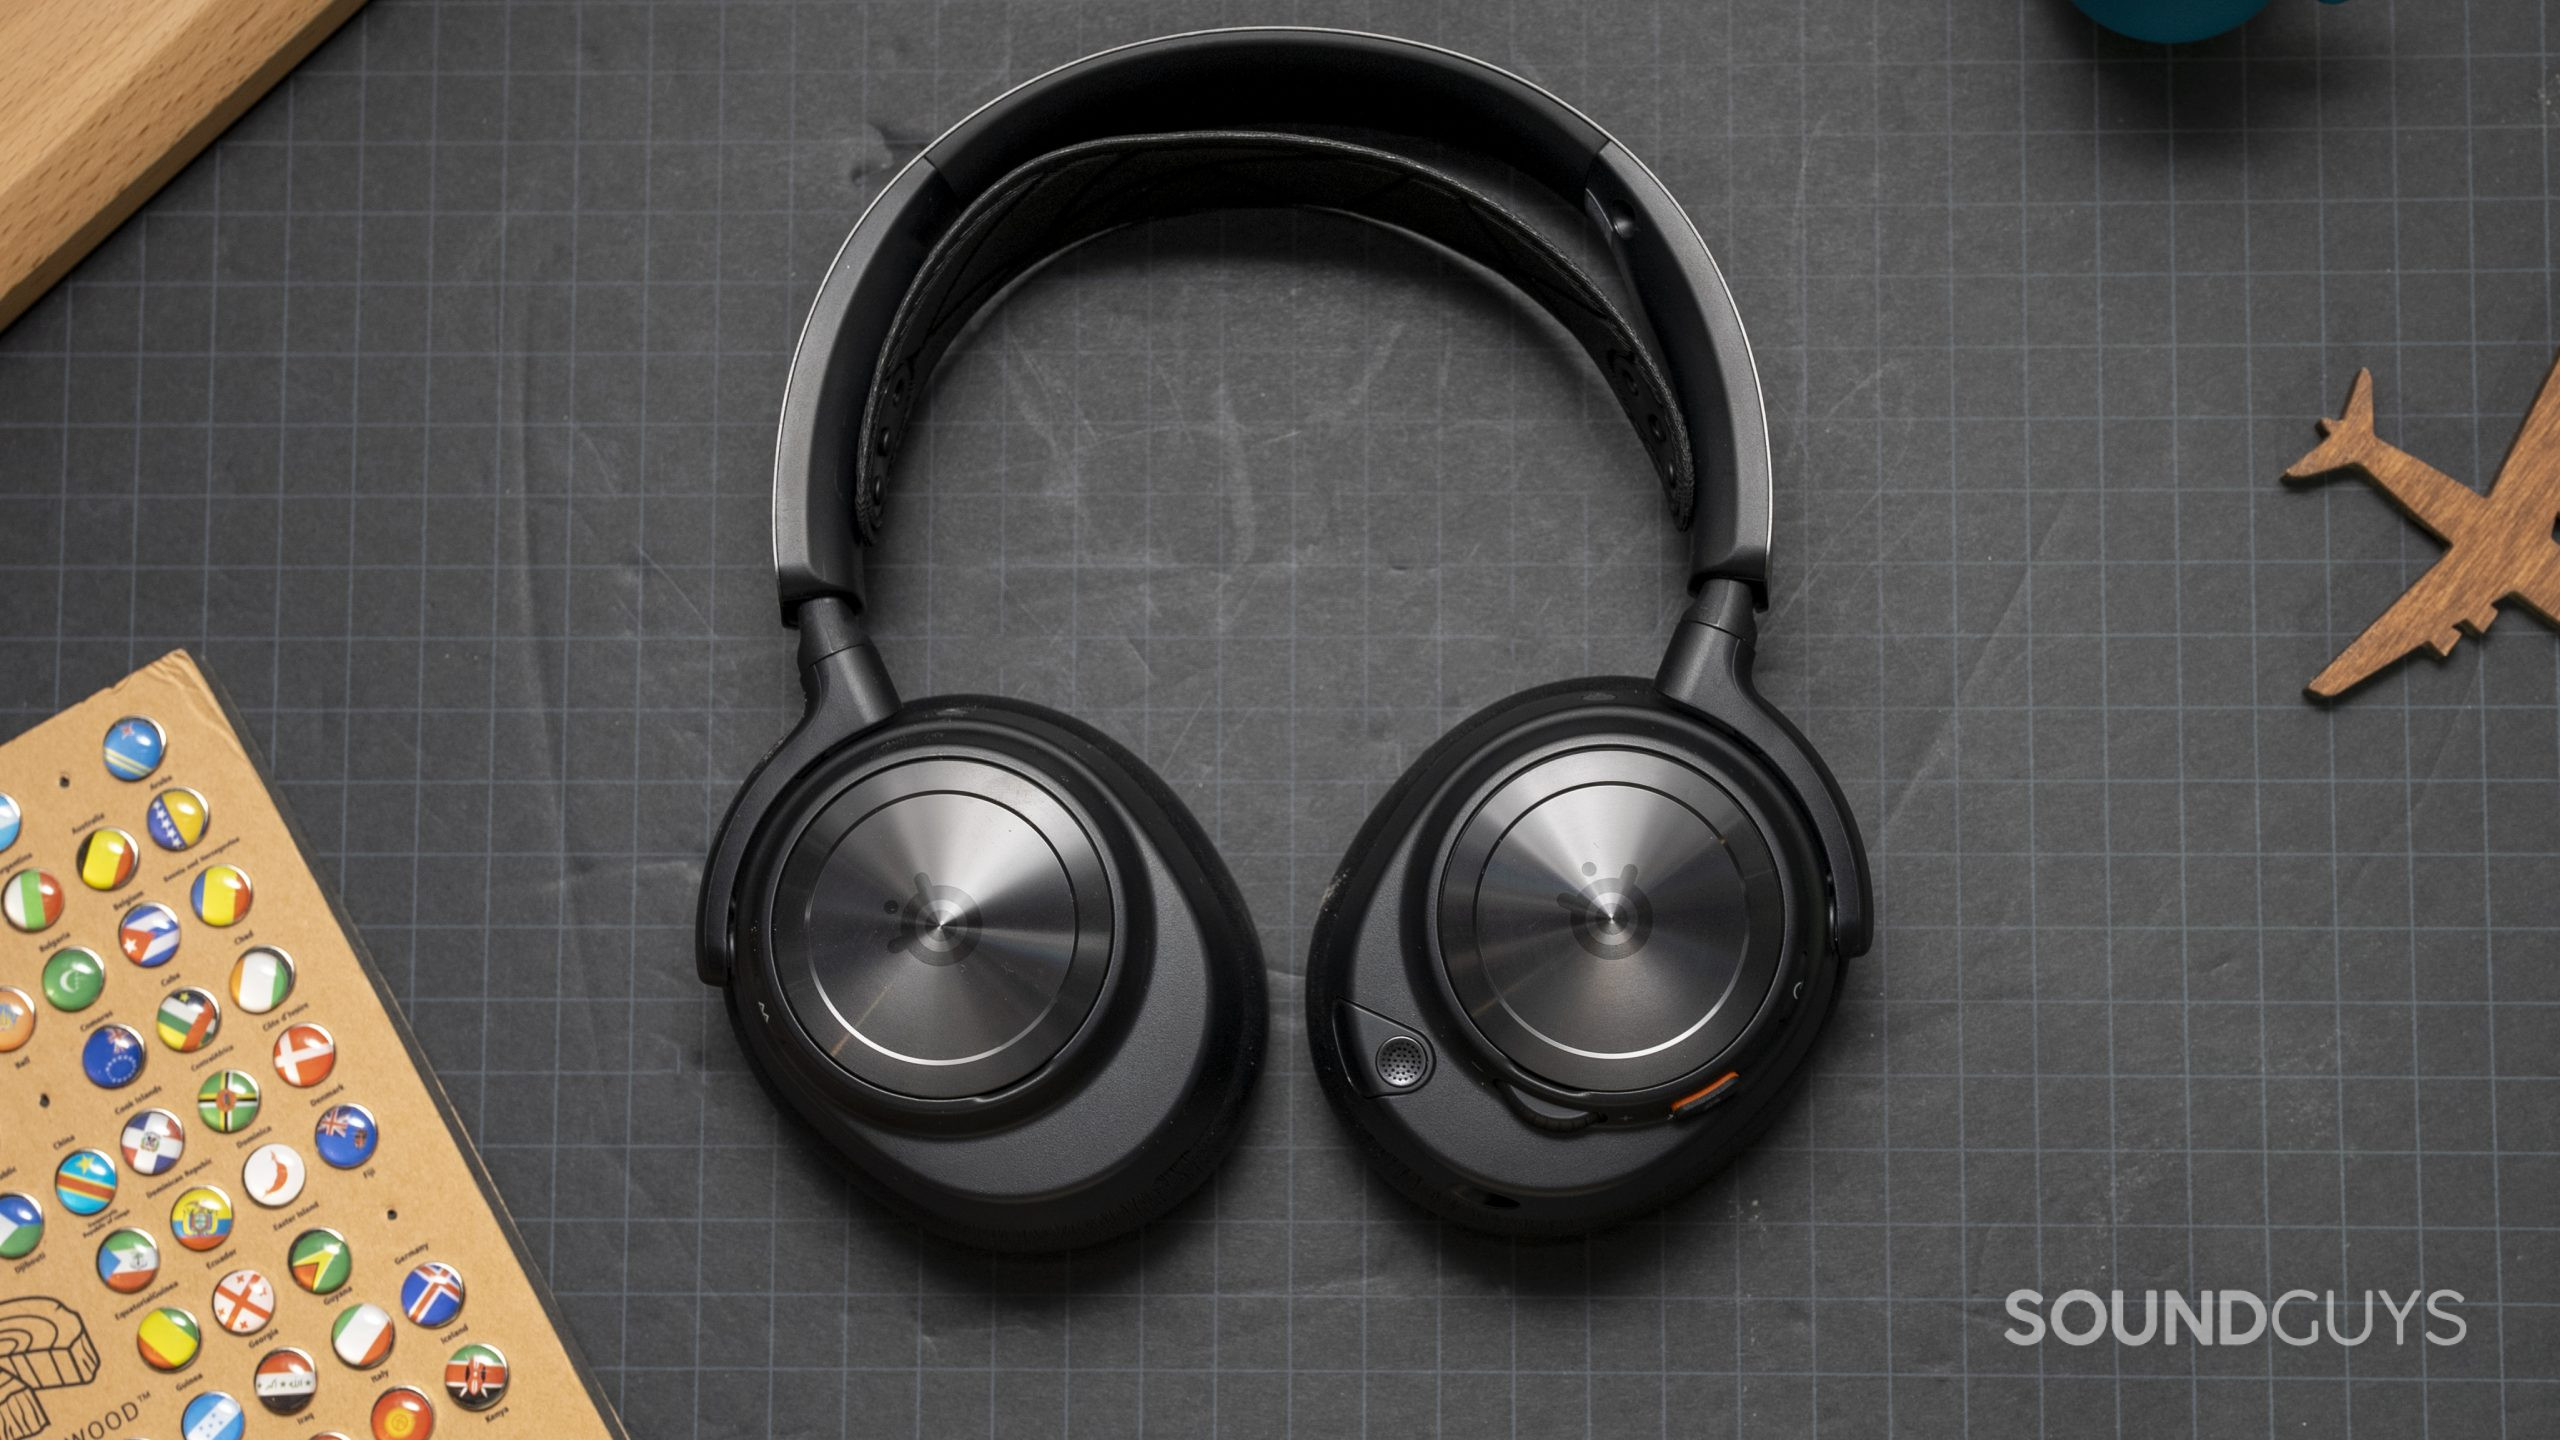 The SteelSeries Arctis Nova Pro Wireless laid flat on a grey surface next to a wooden board.